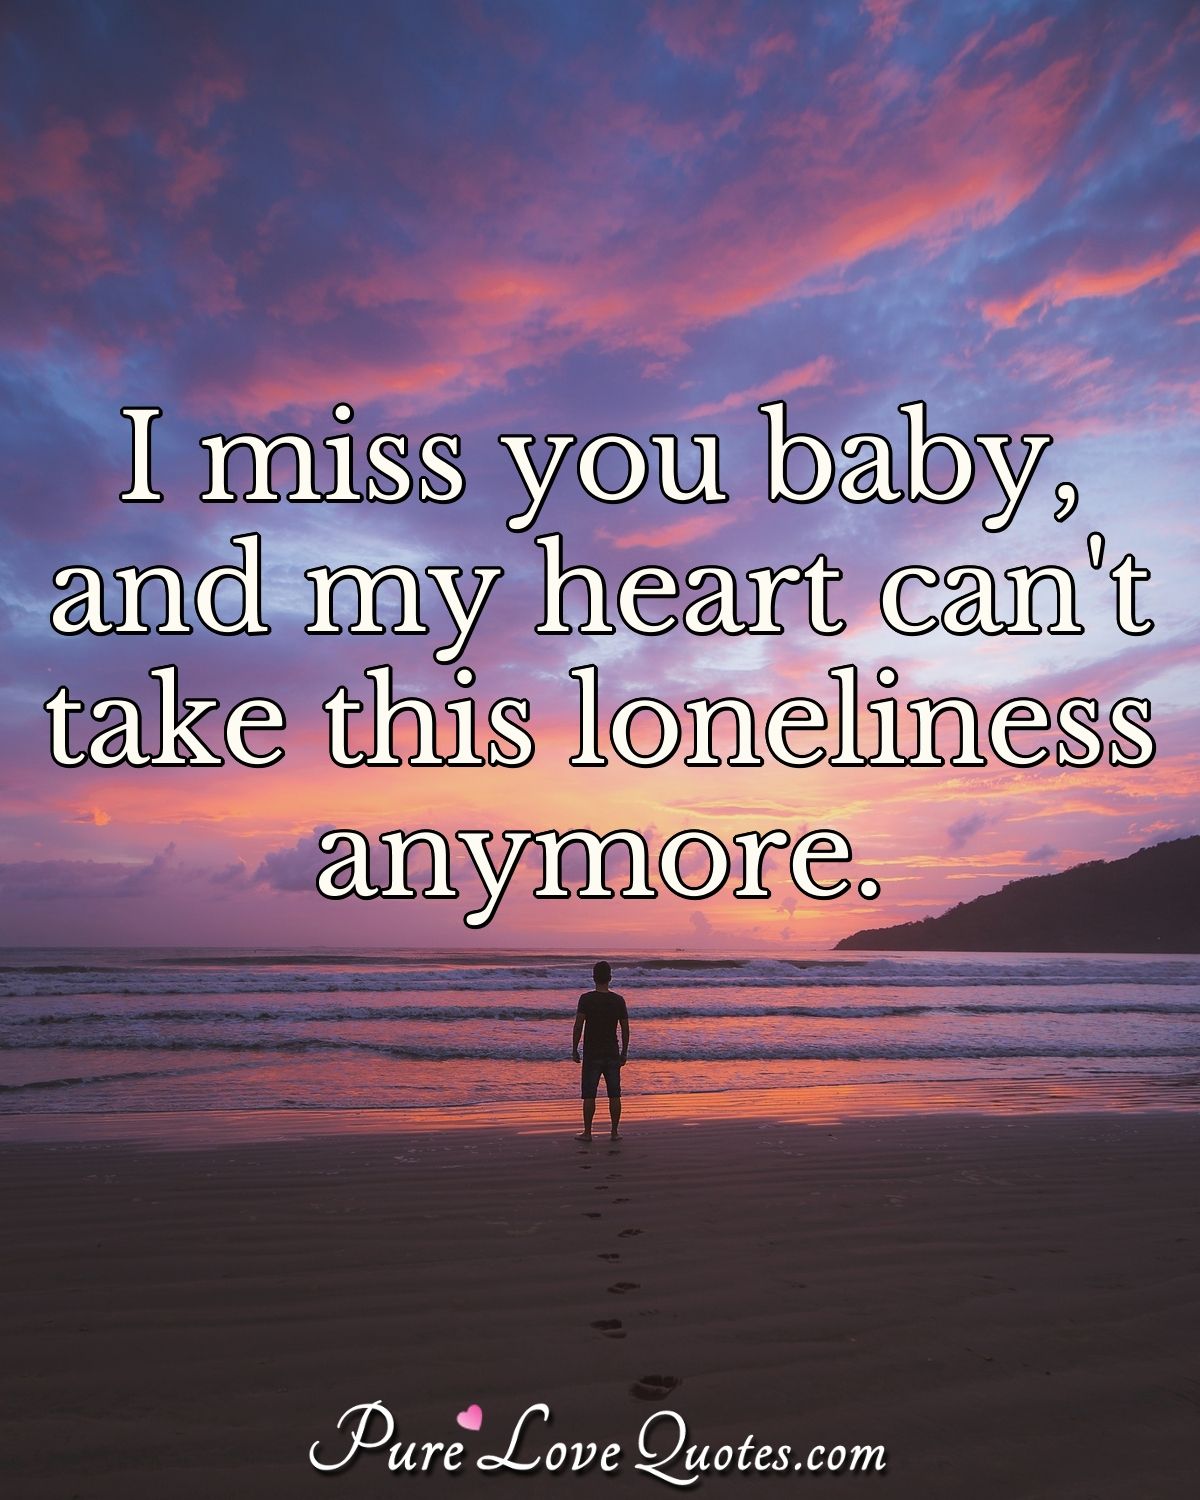 I miss you baby, and my heart can't take this loneliness anymore ...